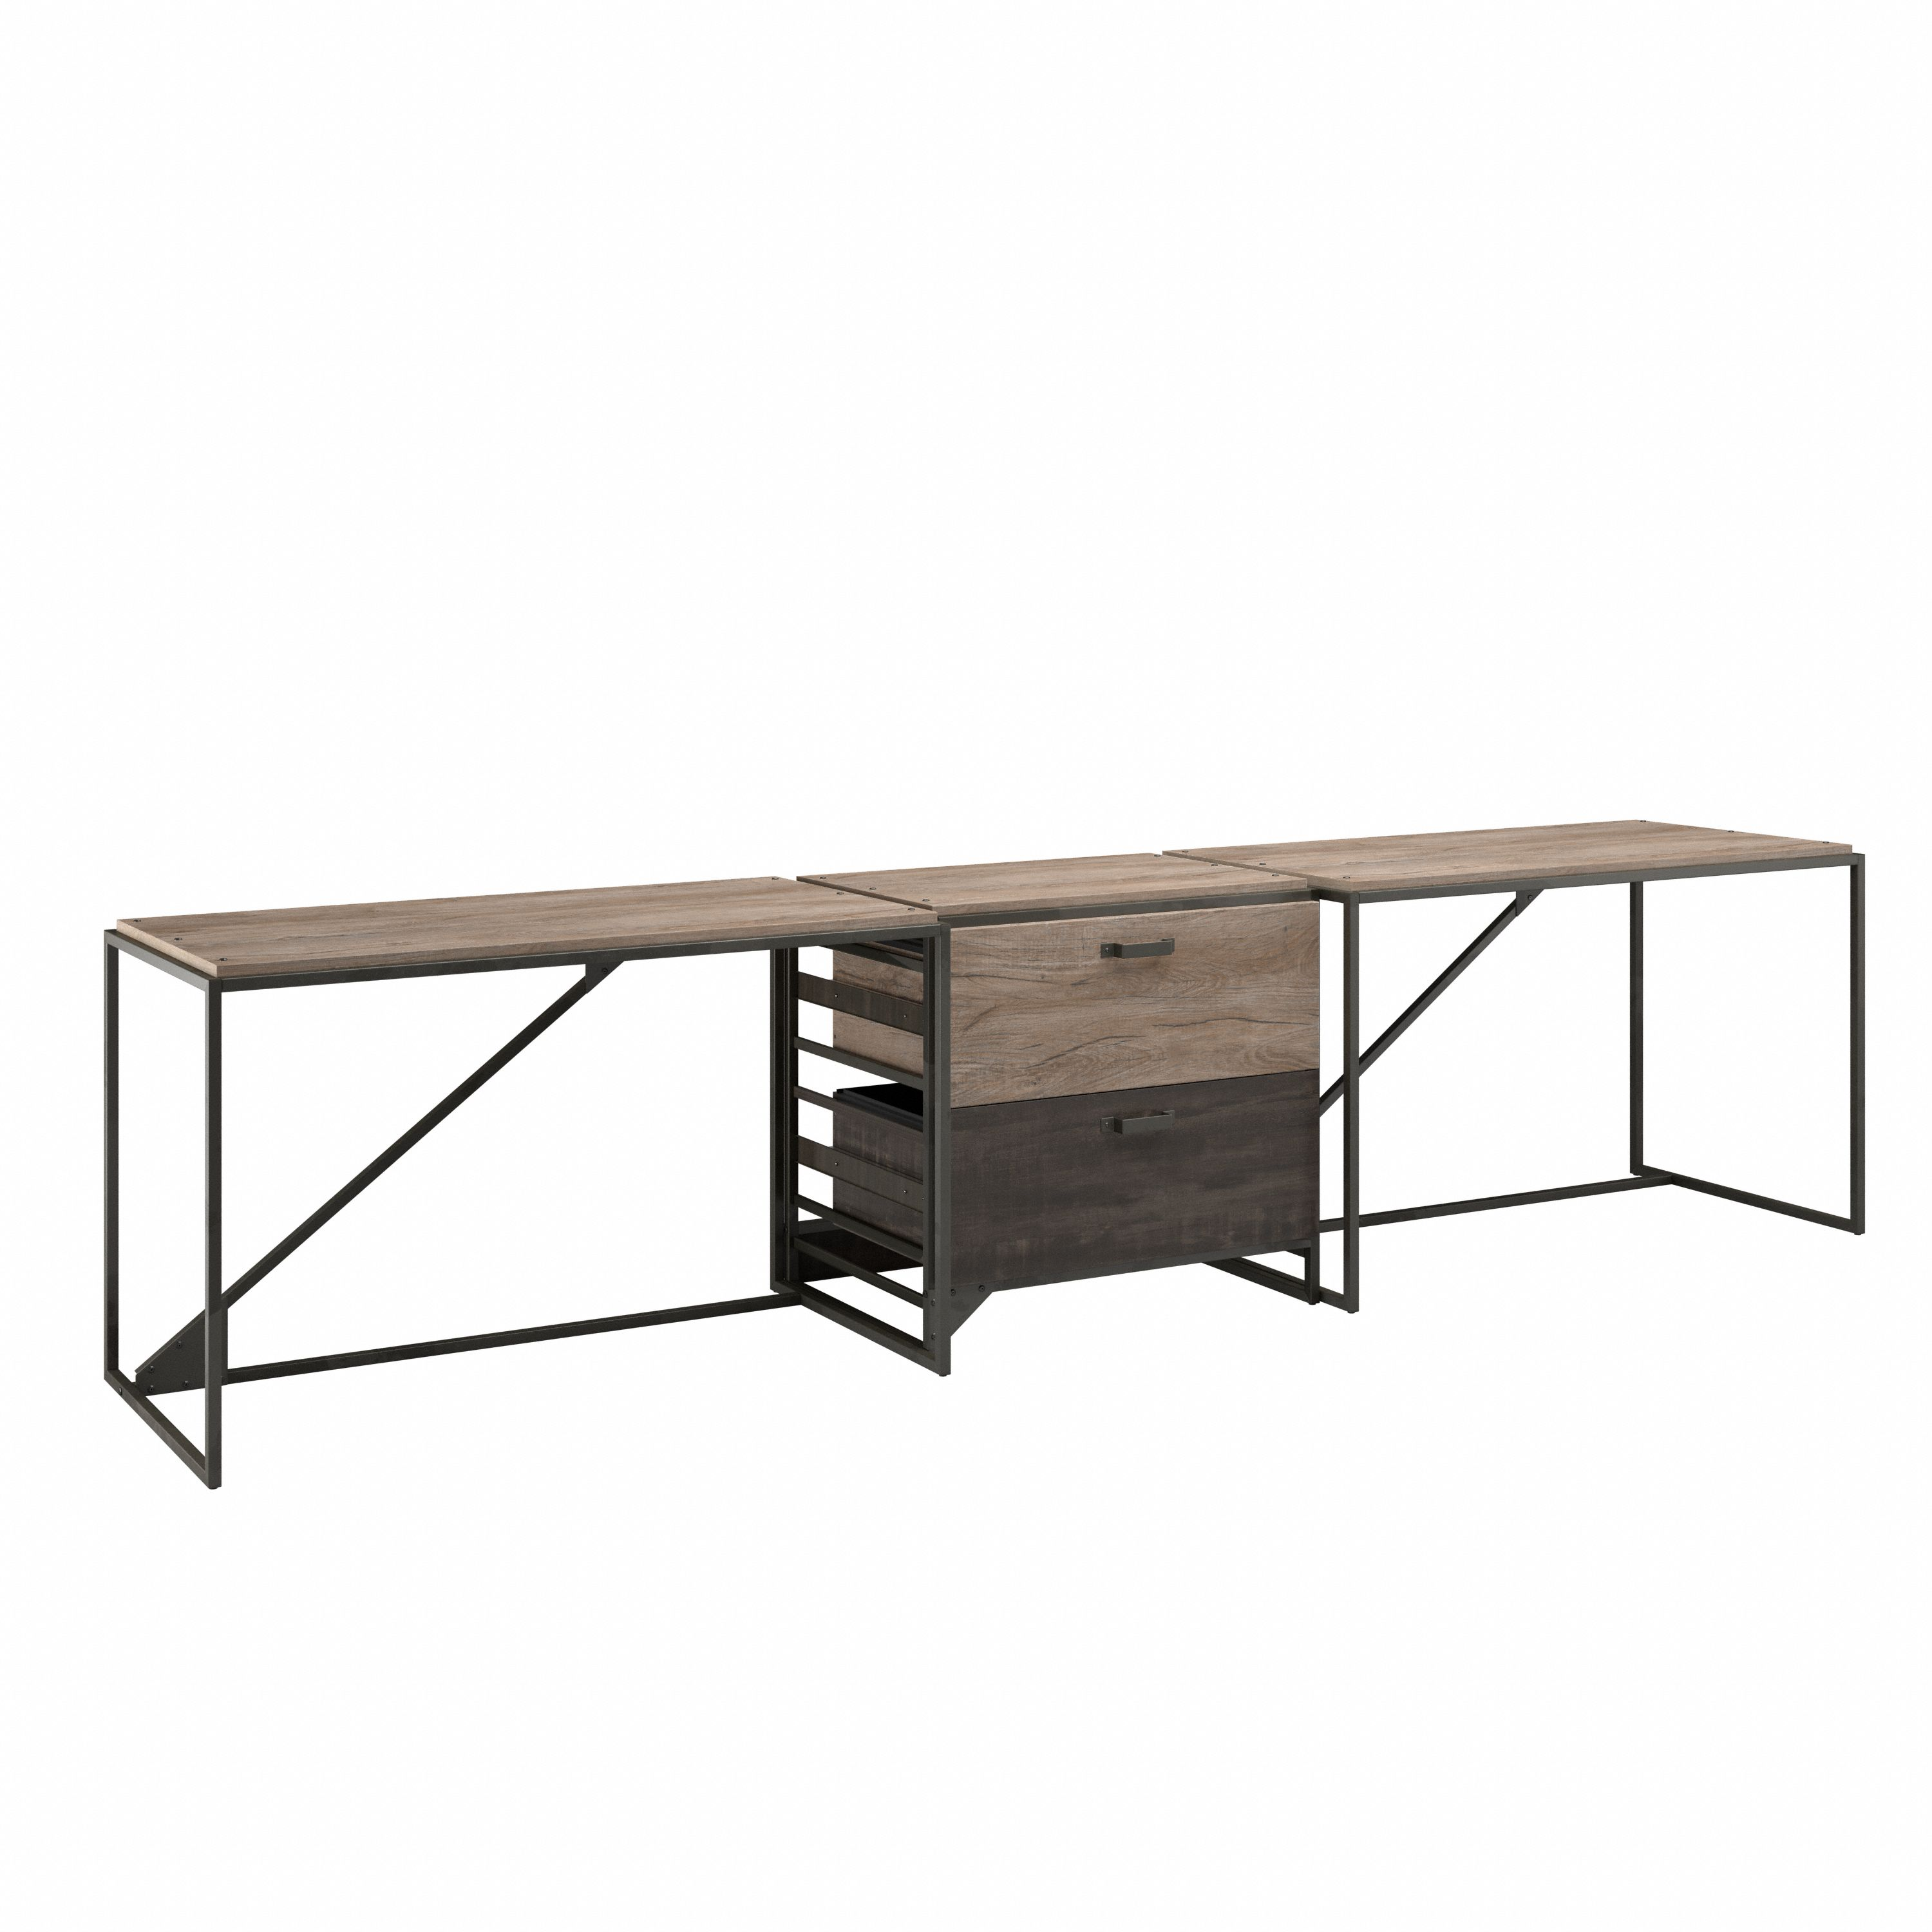 Shop Bush Furniture Refinery 2 Person Industrial Desk Set with Lateral File Cabinet 02 RFY019RG #color_rustic gray/charred wood